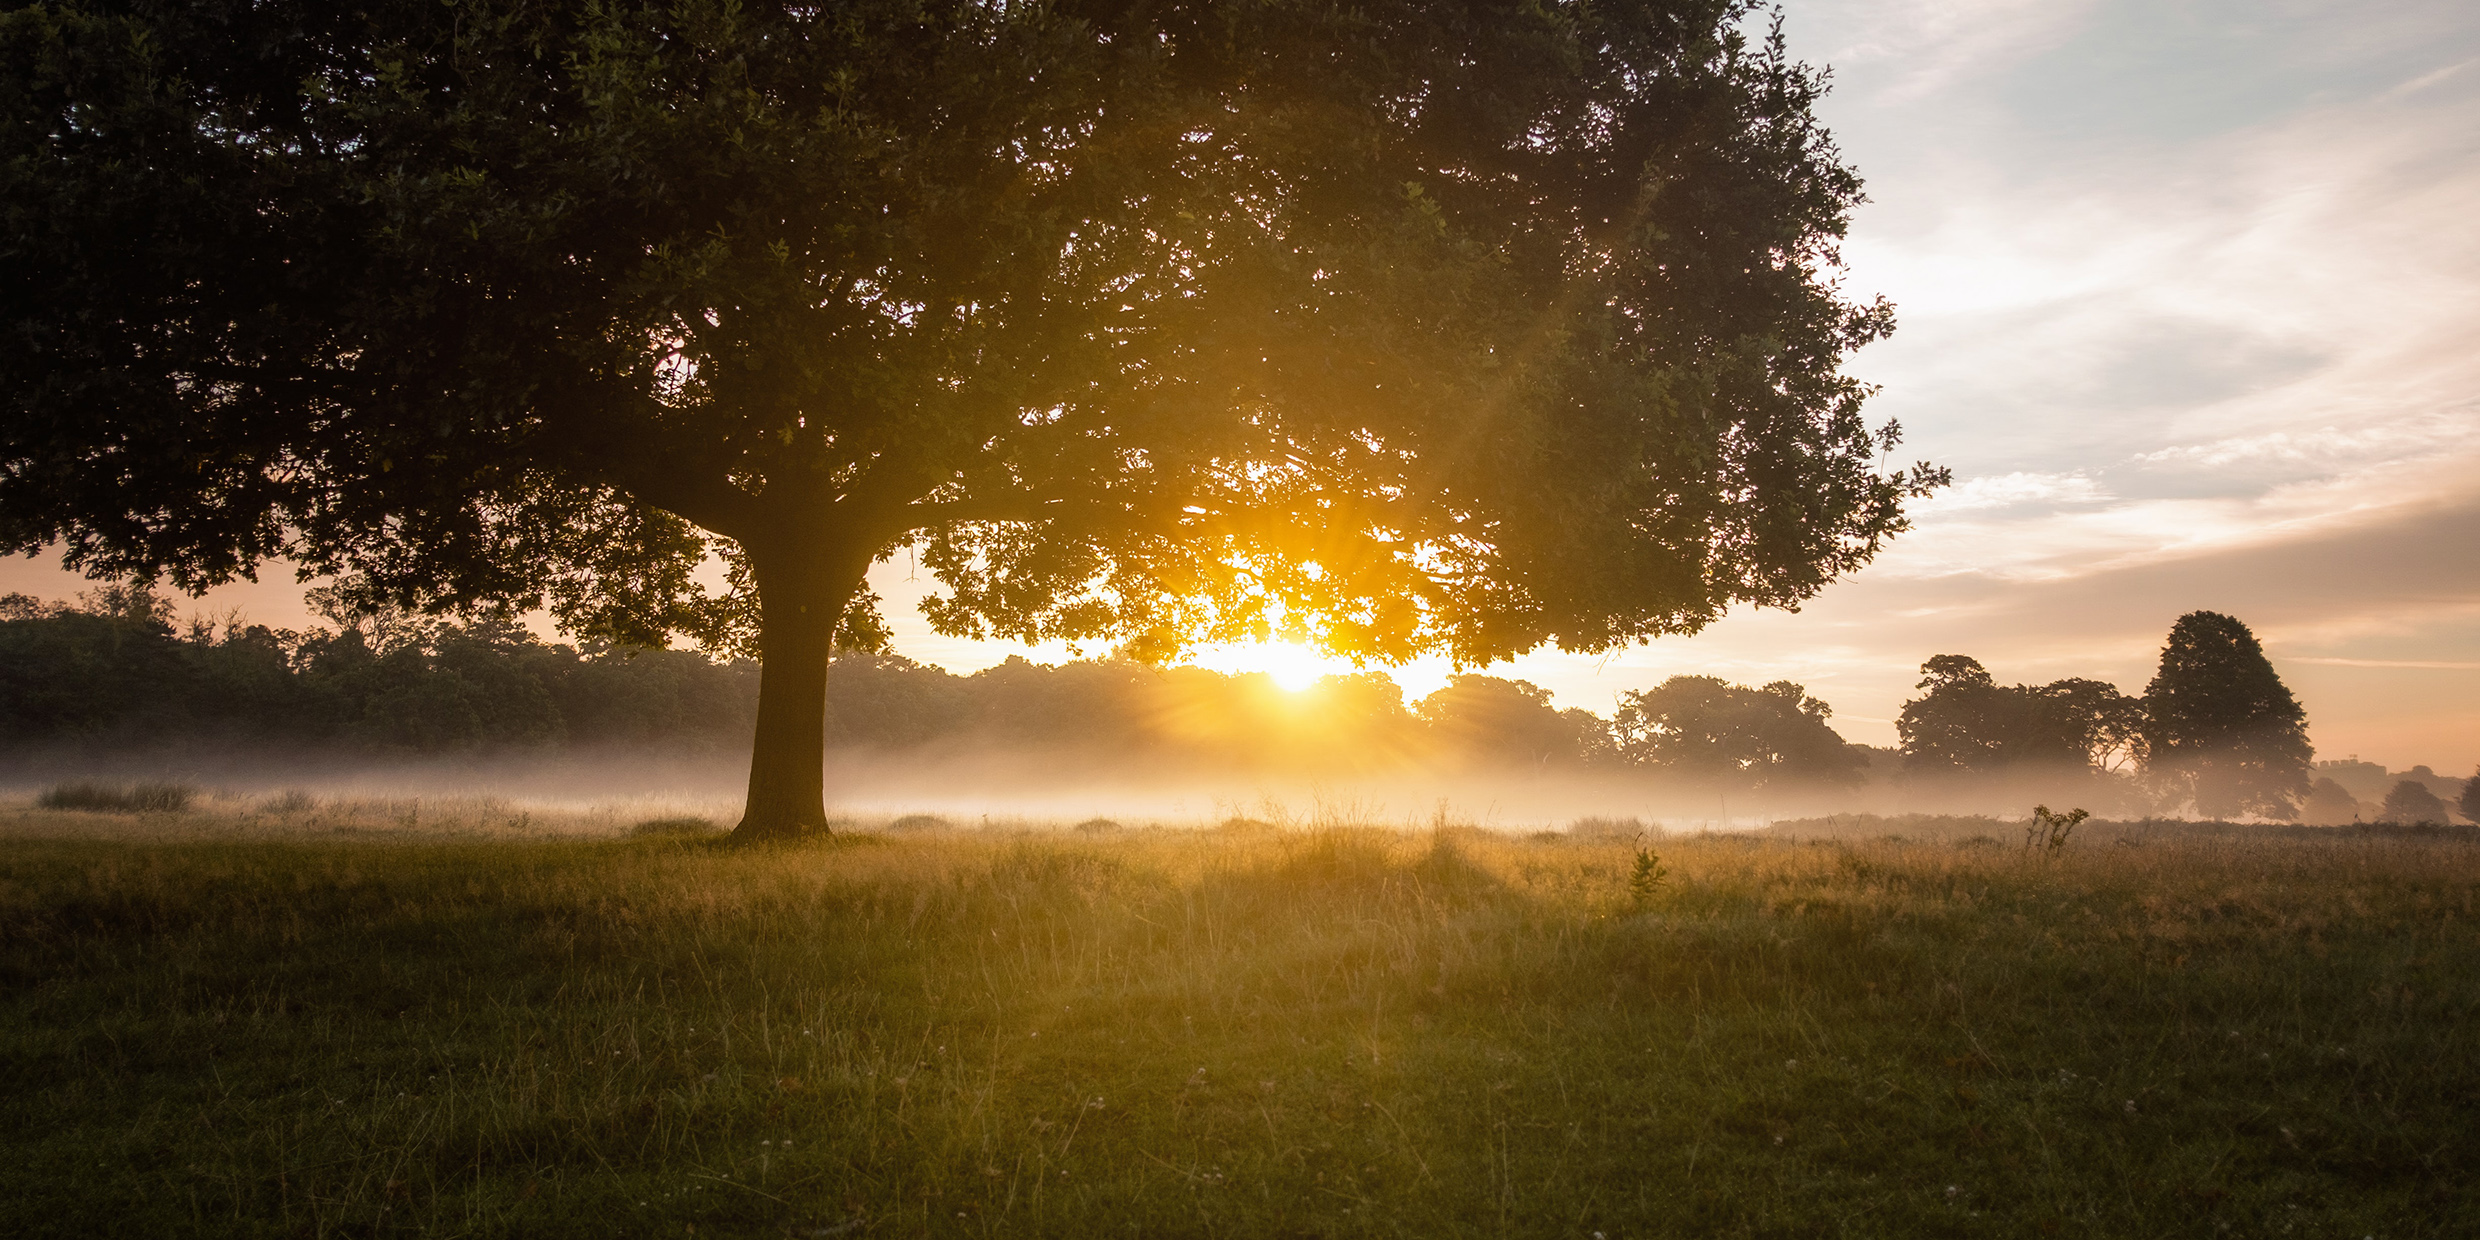 Image of a rising sun beyond a misty meadow